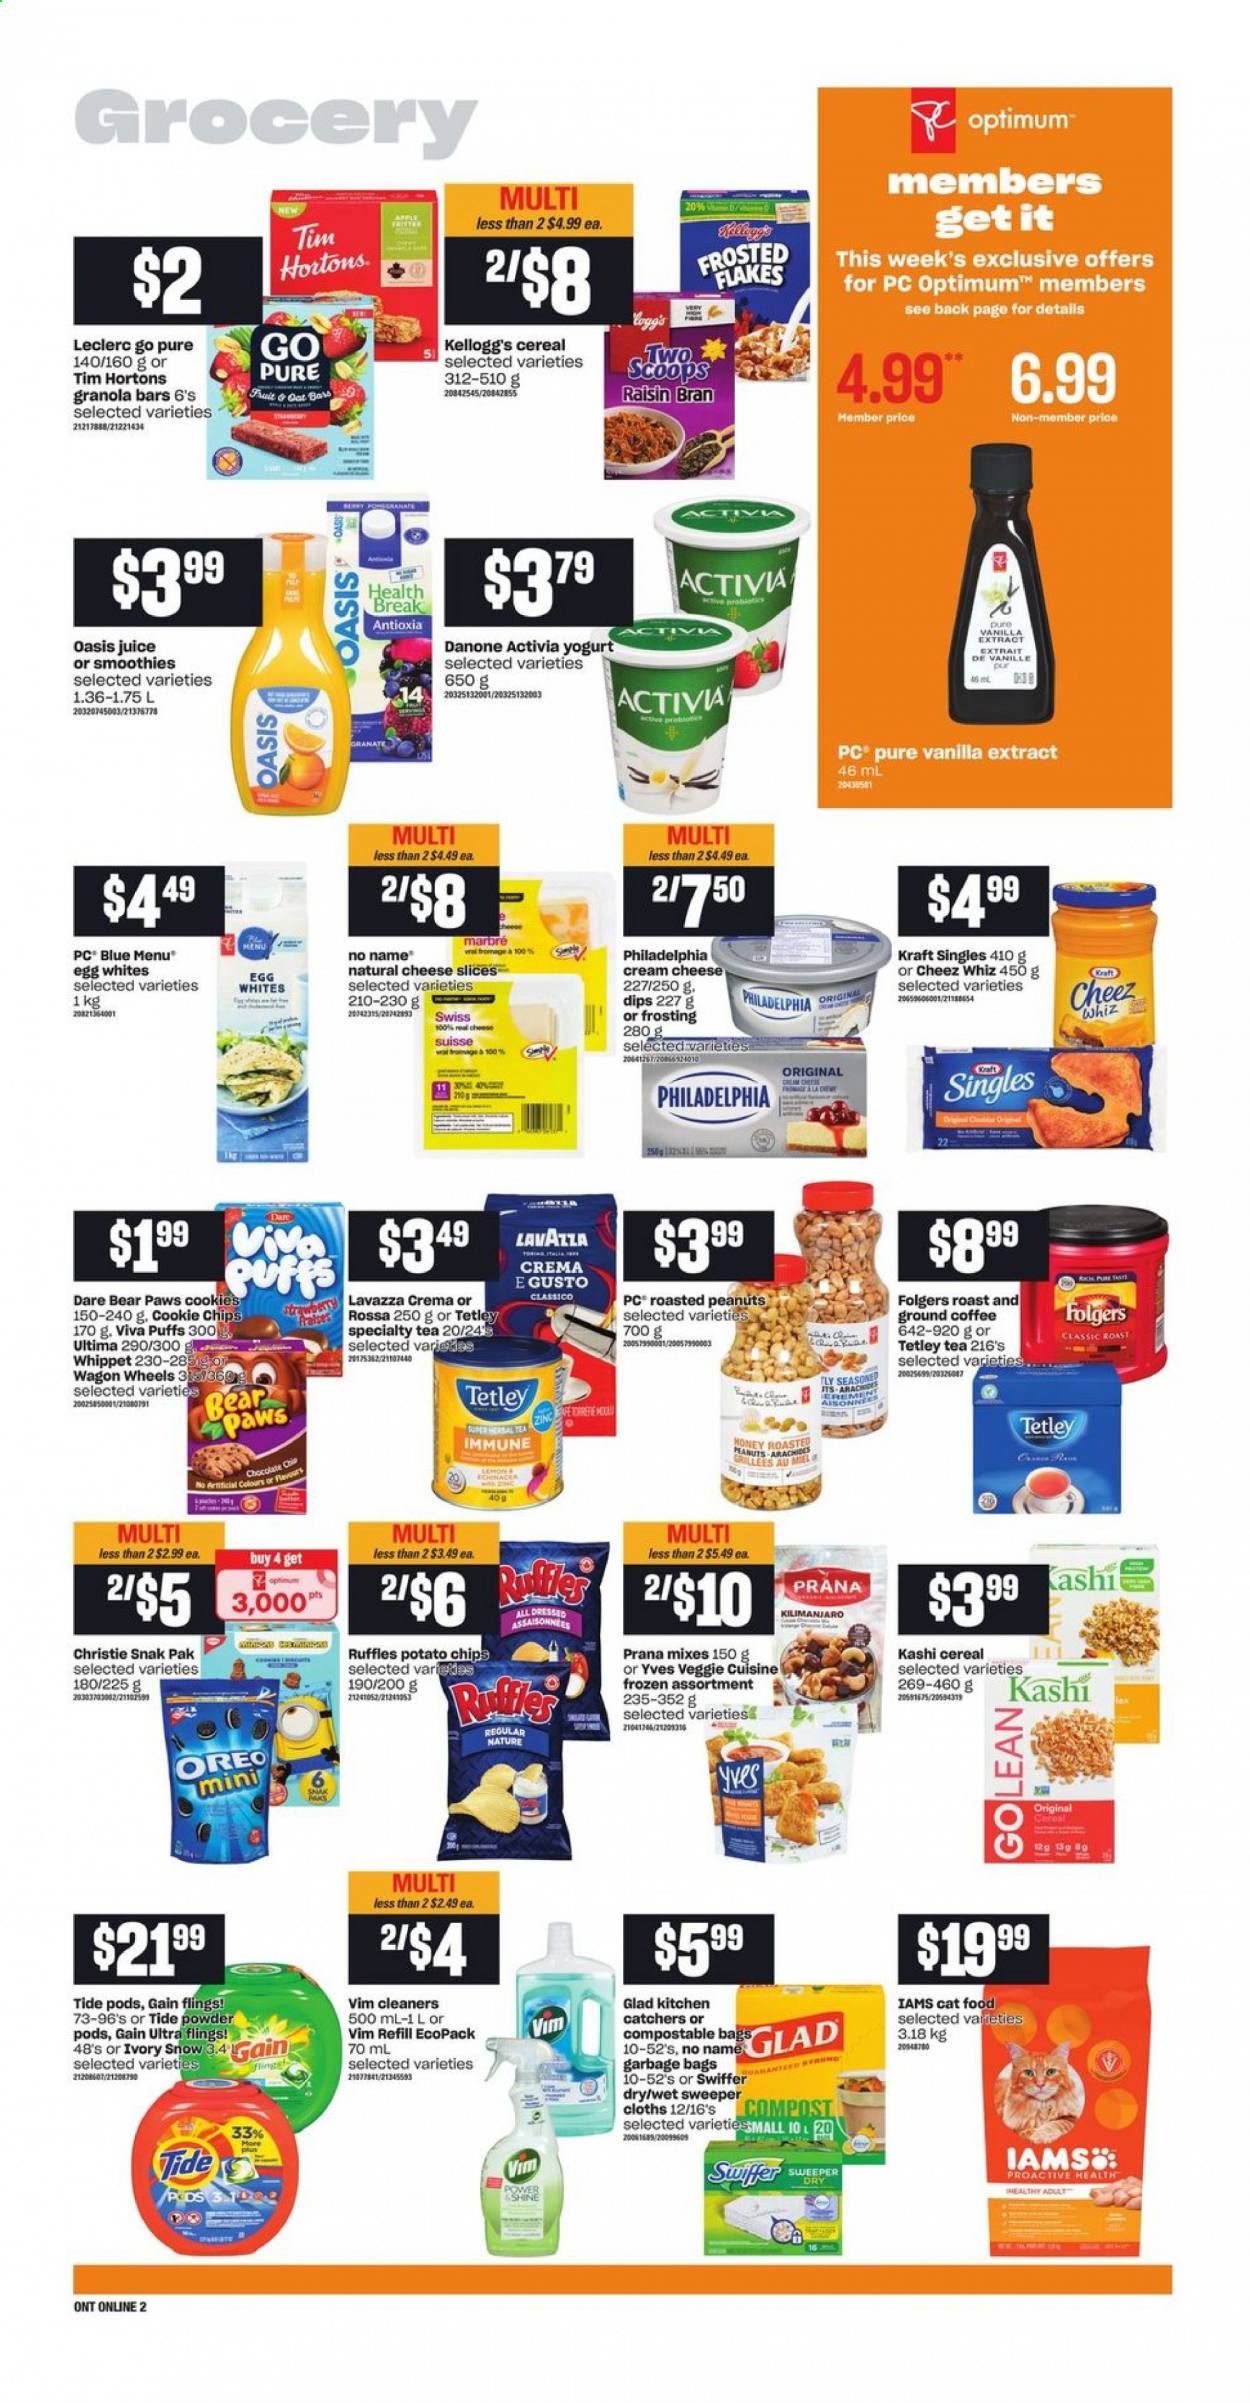 thumbnail - Independent Flyer - July 15, 2021 - July 21, 2021 - Sales products - puffs, lemons, No Name, Kraft®, cream cheese, sandwich slices, sliced cheese, cheese, Kraft Singles, yoghurt, Activia, eggs, cookies, chocolate, Kellogg's, potato chips, Ruffles, frosting, oats, vanilla extract, cereals, granola bar, Frosted Flakes, Raisin Bran, Classico, roasted peanuts, peanuts, juice, tea, herbal tea, coffee, Folgers, ground coffee, Lavazza, Gain, Swiffer, Tide, bag, Paws, animal food, cat food, Optimum, Iams, wagon, Oreo, Danone. Page 6.